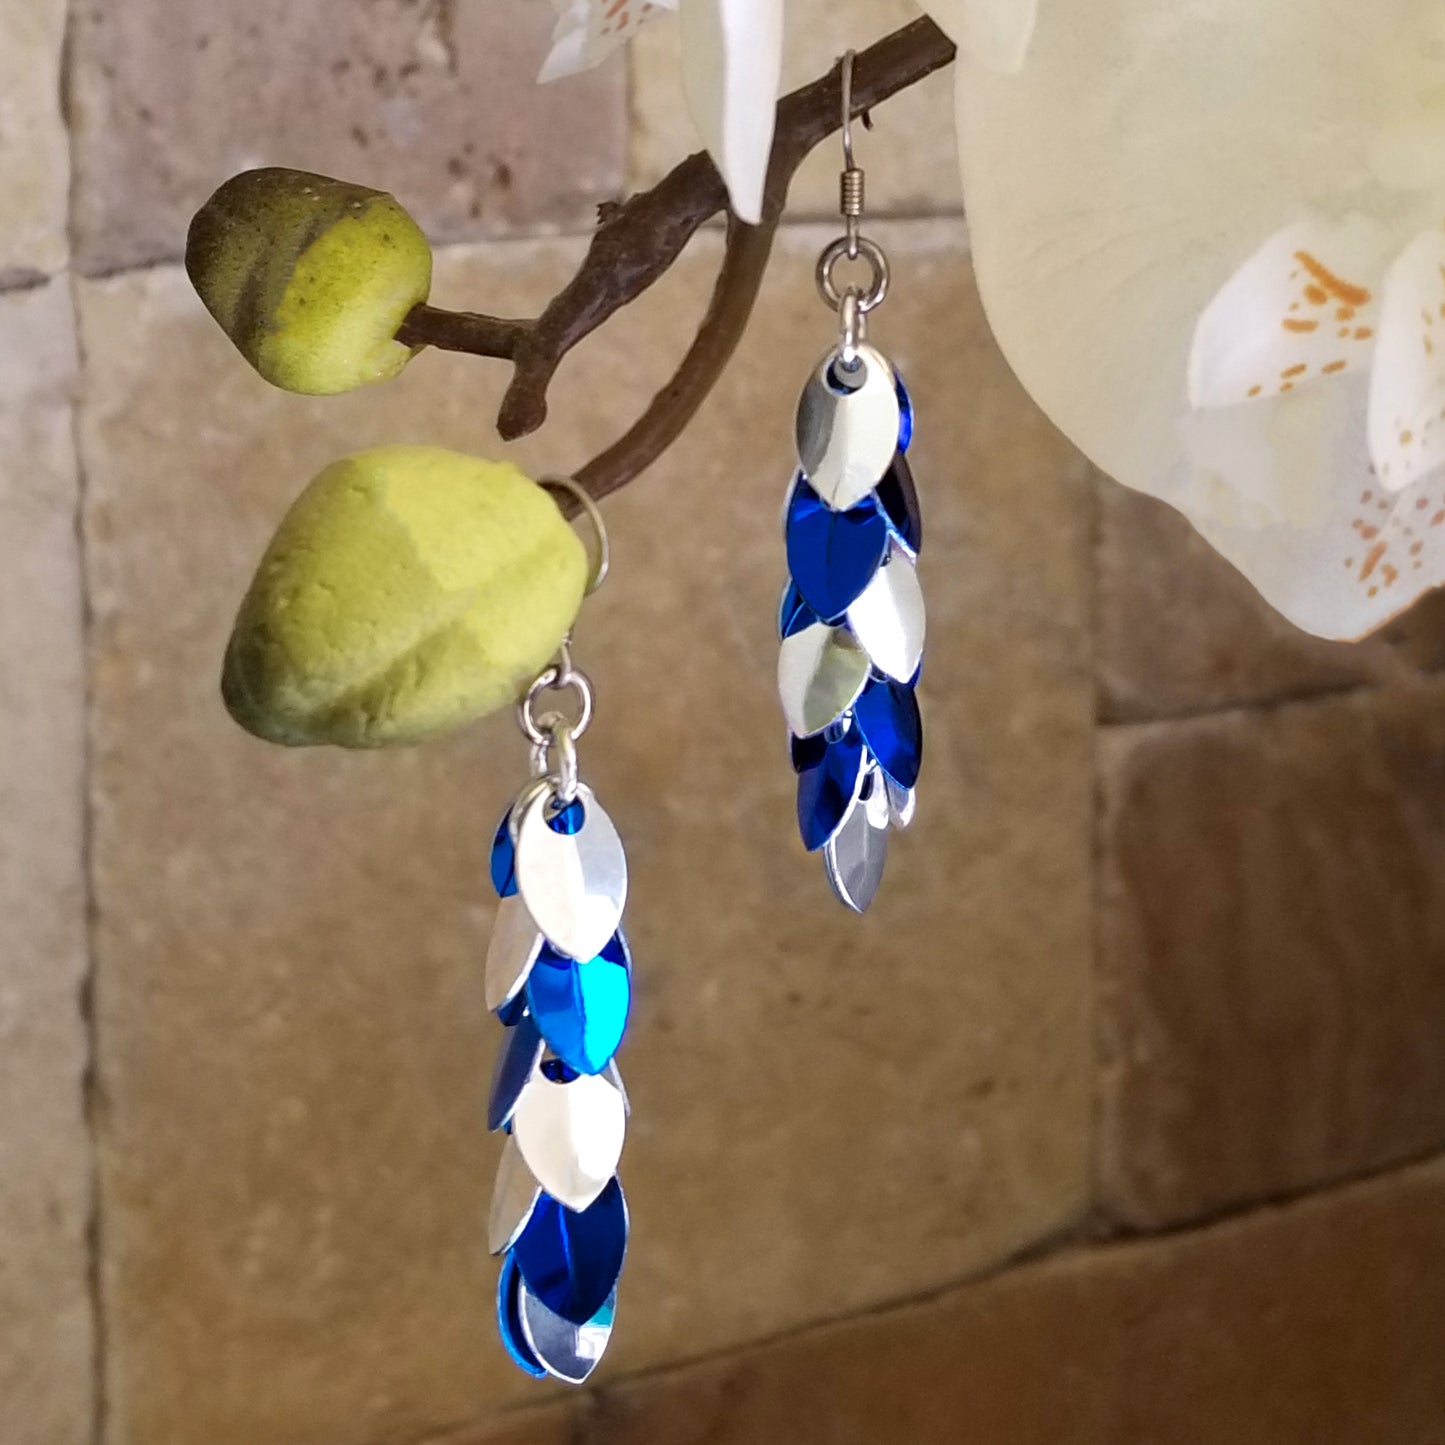 Blue and Silver Shaggy Scale Earrings